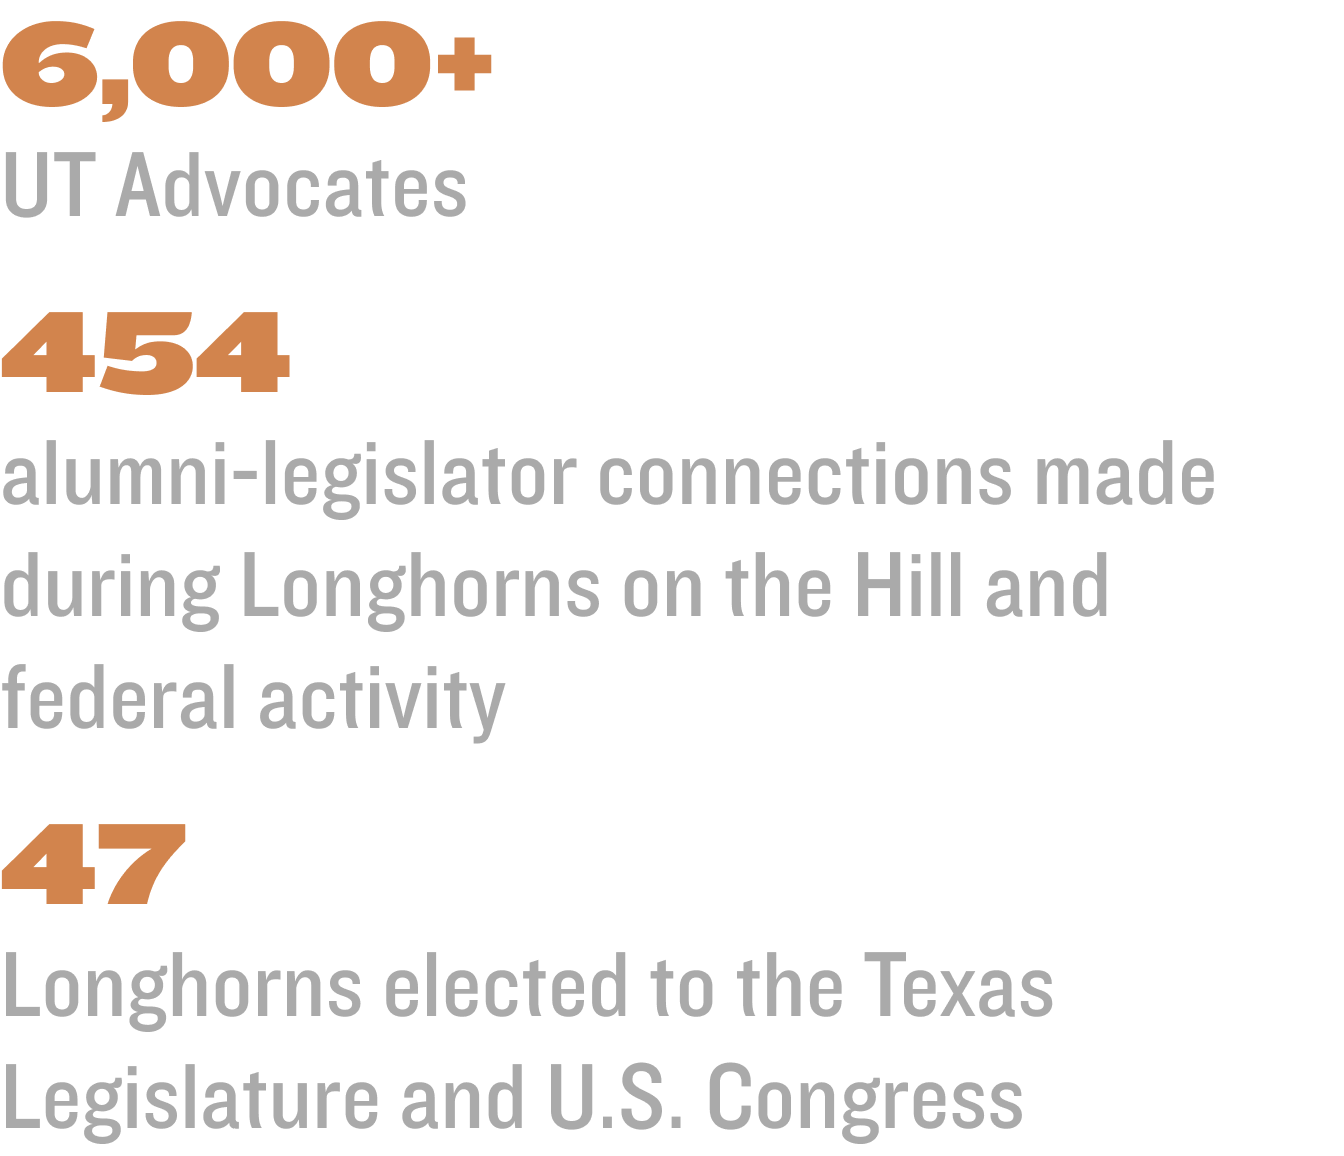 6,000+  UT Advocates   454  alumni-legislator connections made during Longhorns on the Hill and federal activity 47  Longhorns elected to the Texas Legislature and U.S. Congress  